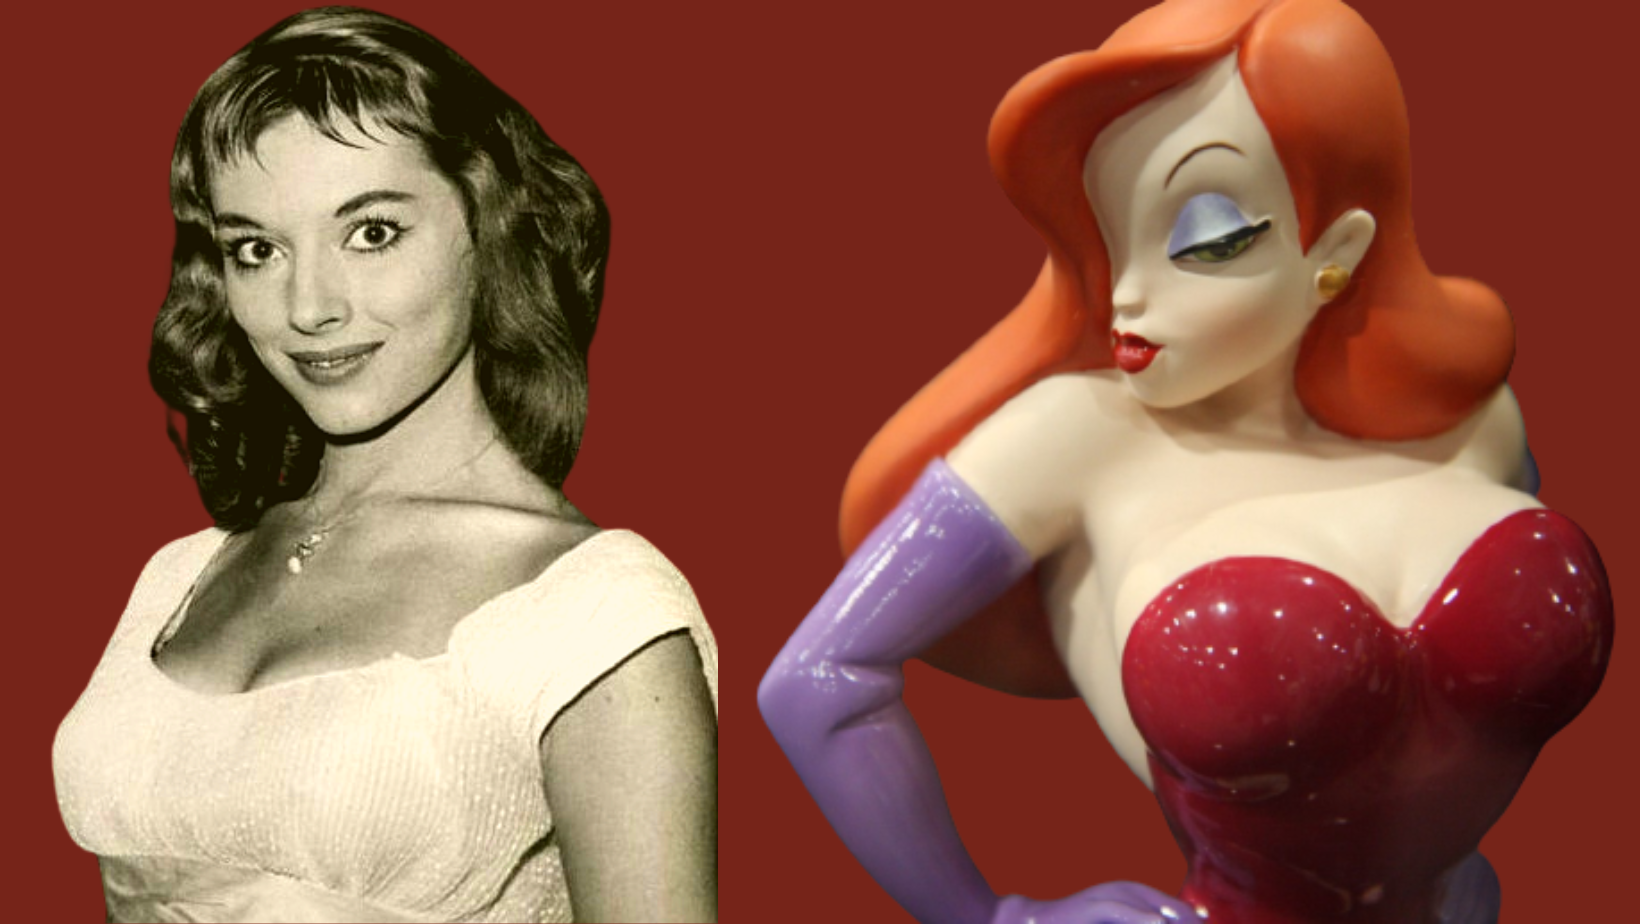 Why Beauty Isn't Enough â€” From the Pin-Up Girl Who Inspired Jessica Rabbit  | by Maria MilojkoviÄ‡, MA | Fragments of History | Medium